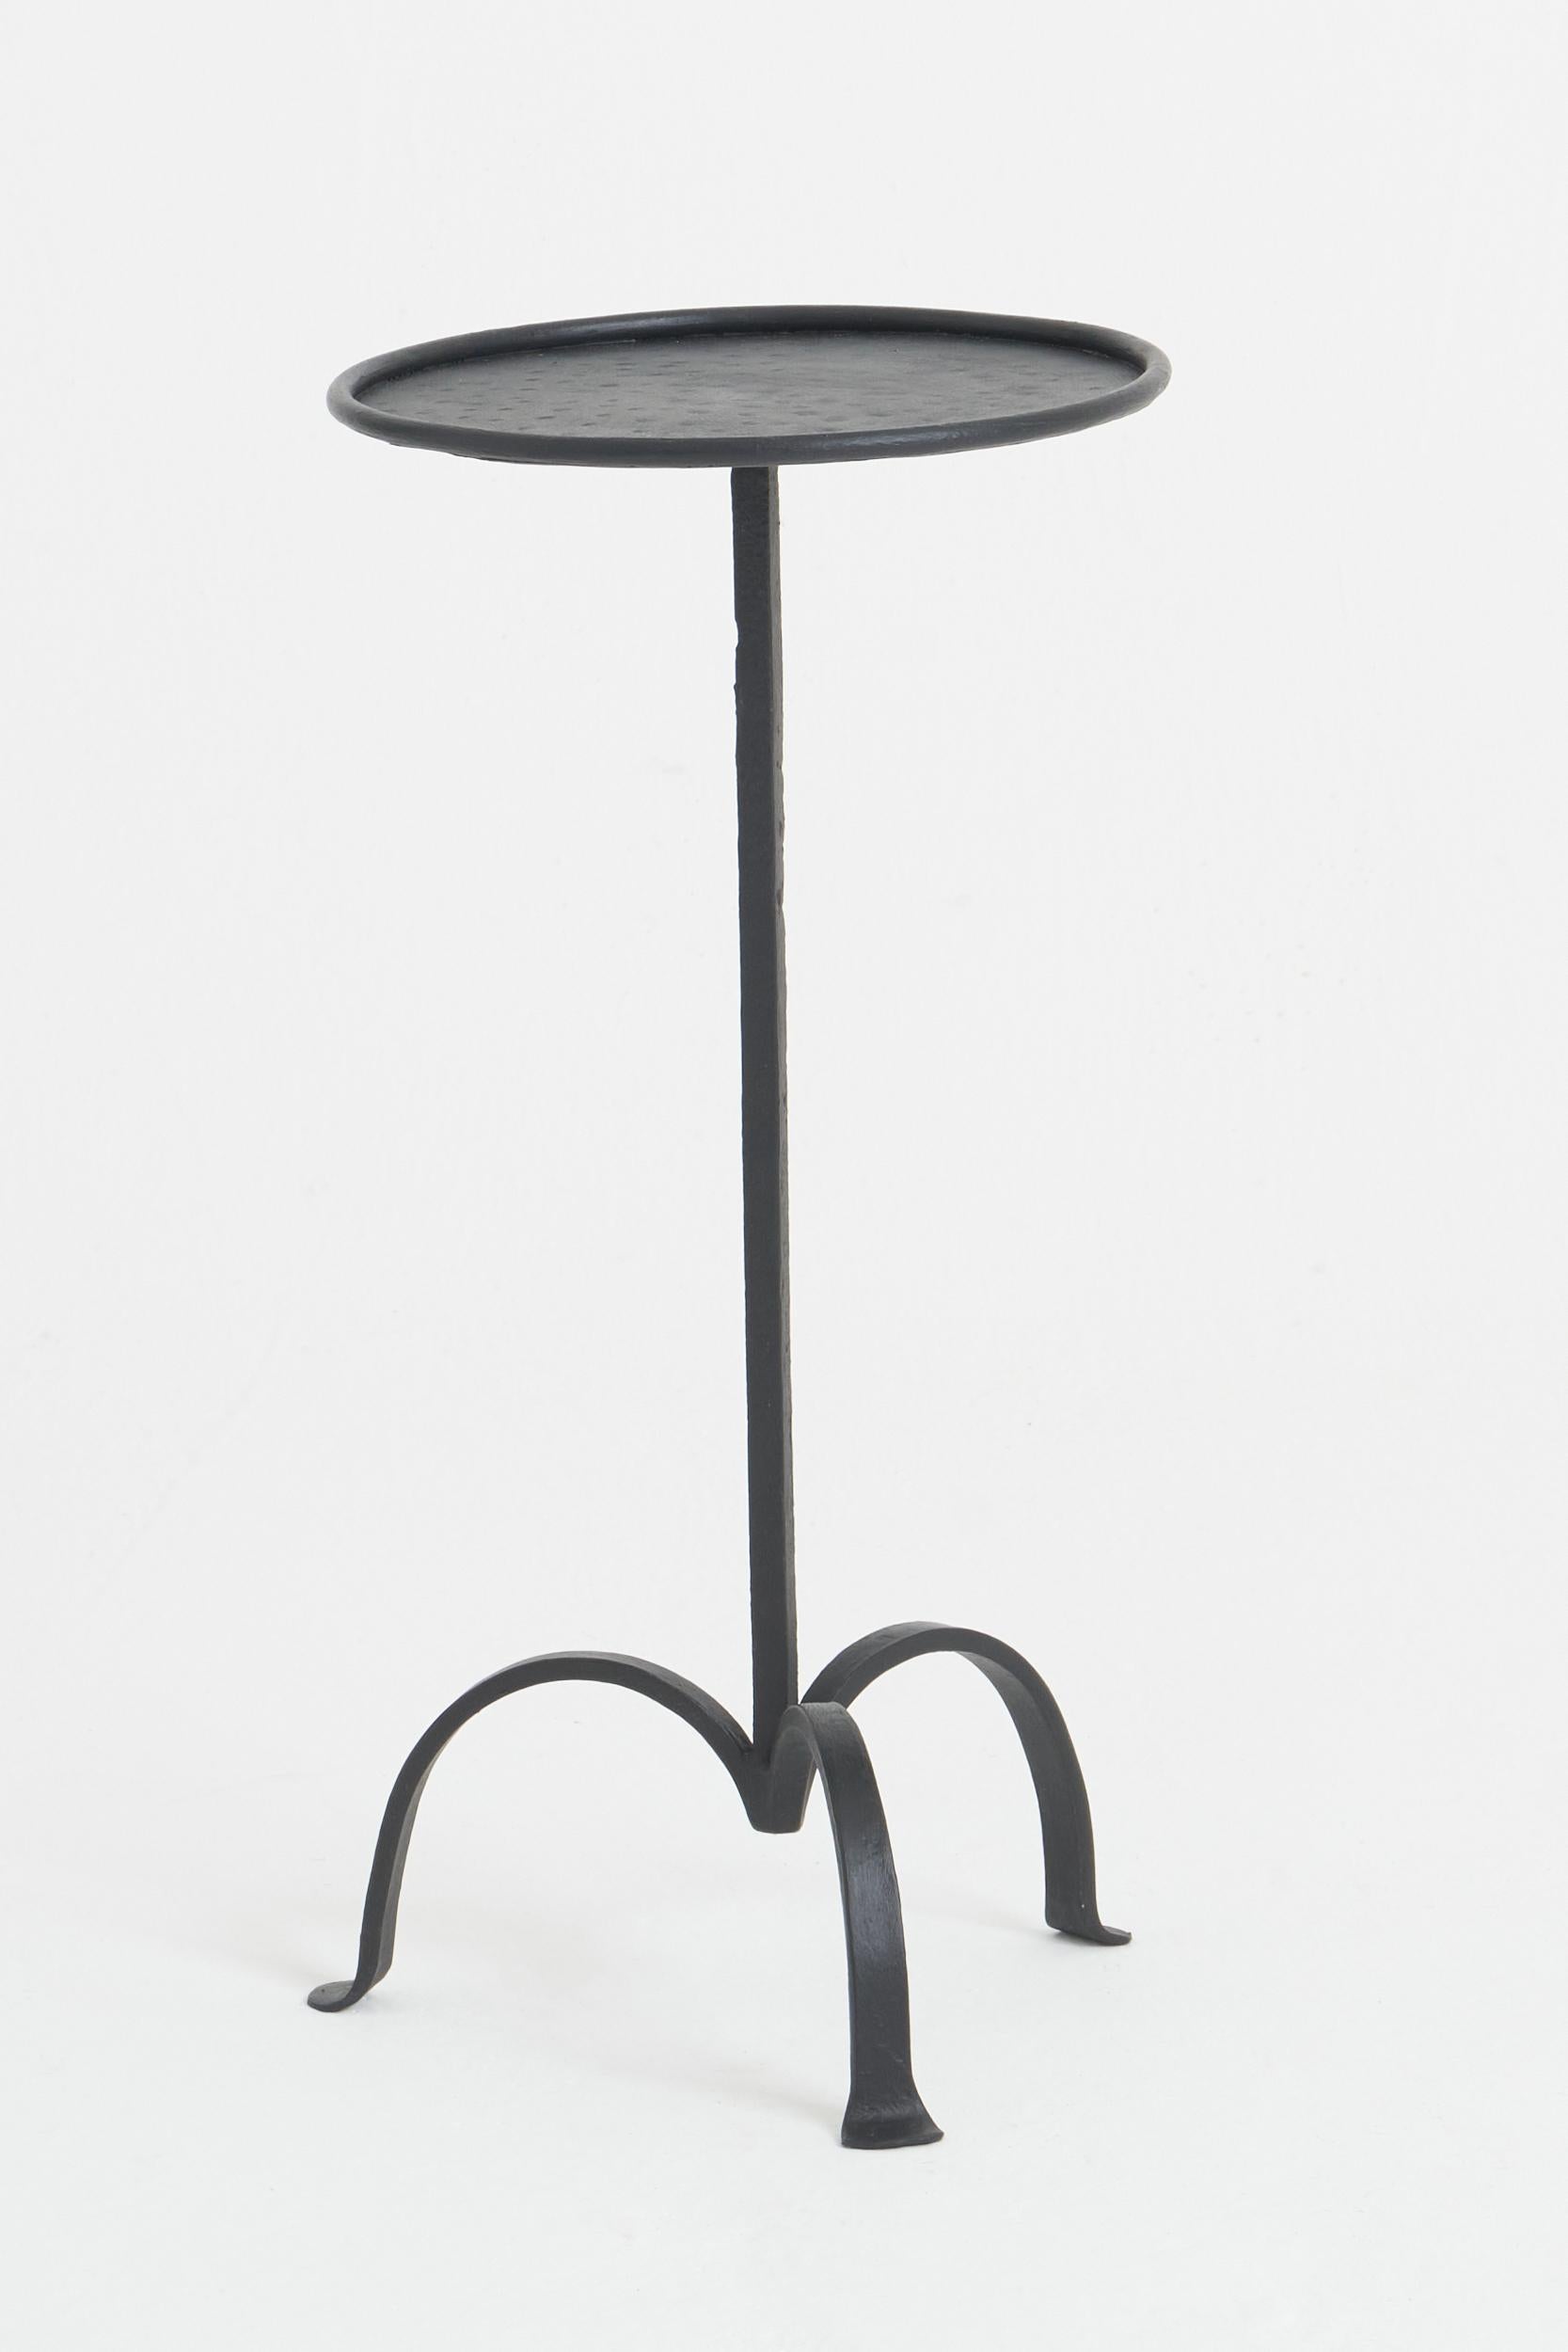 A black patinated wrought iron martini table.
Spain, mid 20th century
52 cm high by 26 cm diameter.